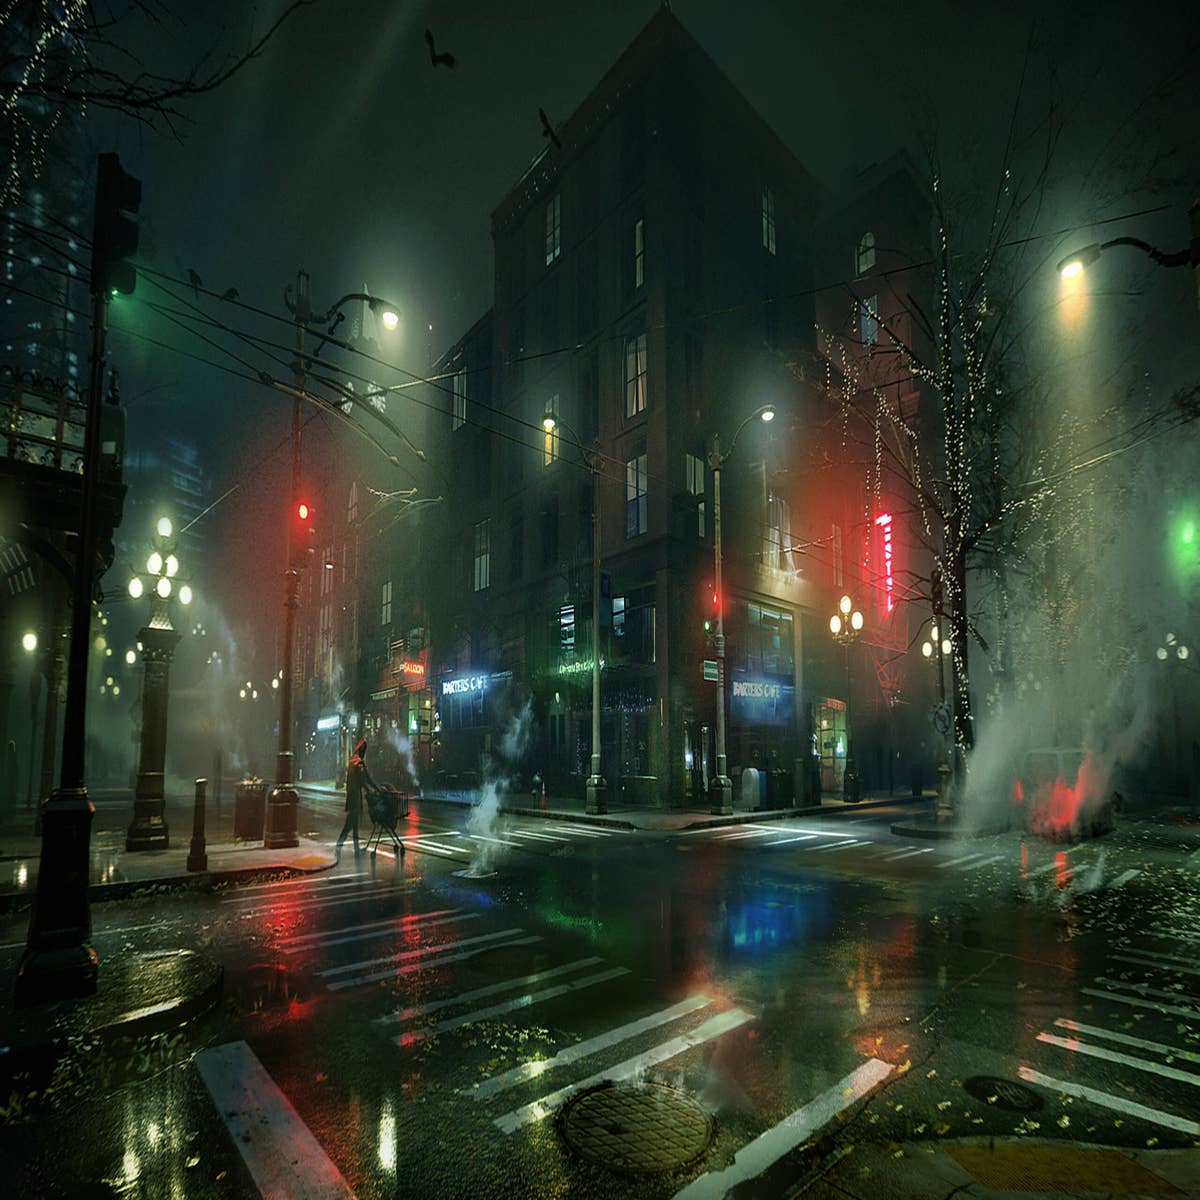 New trailer for Vampire: The Masquerade – Bloodlines 2 showcases the  Tremere Clan